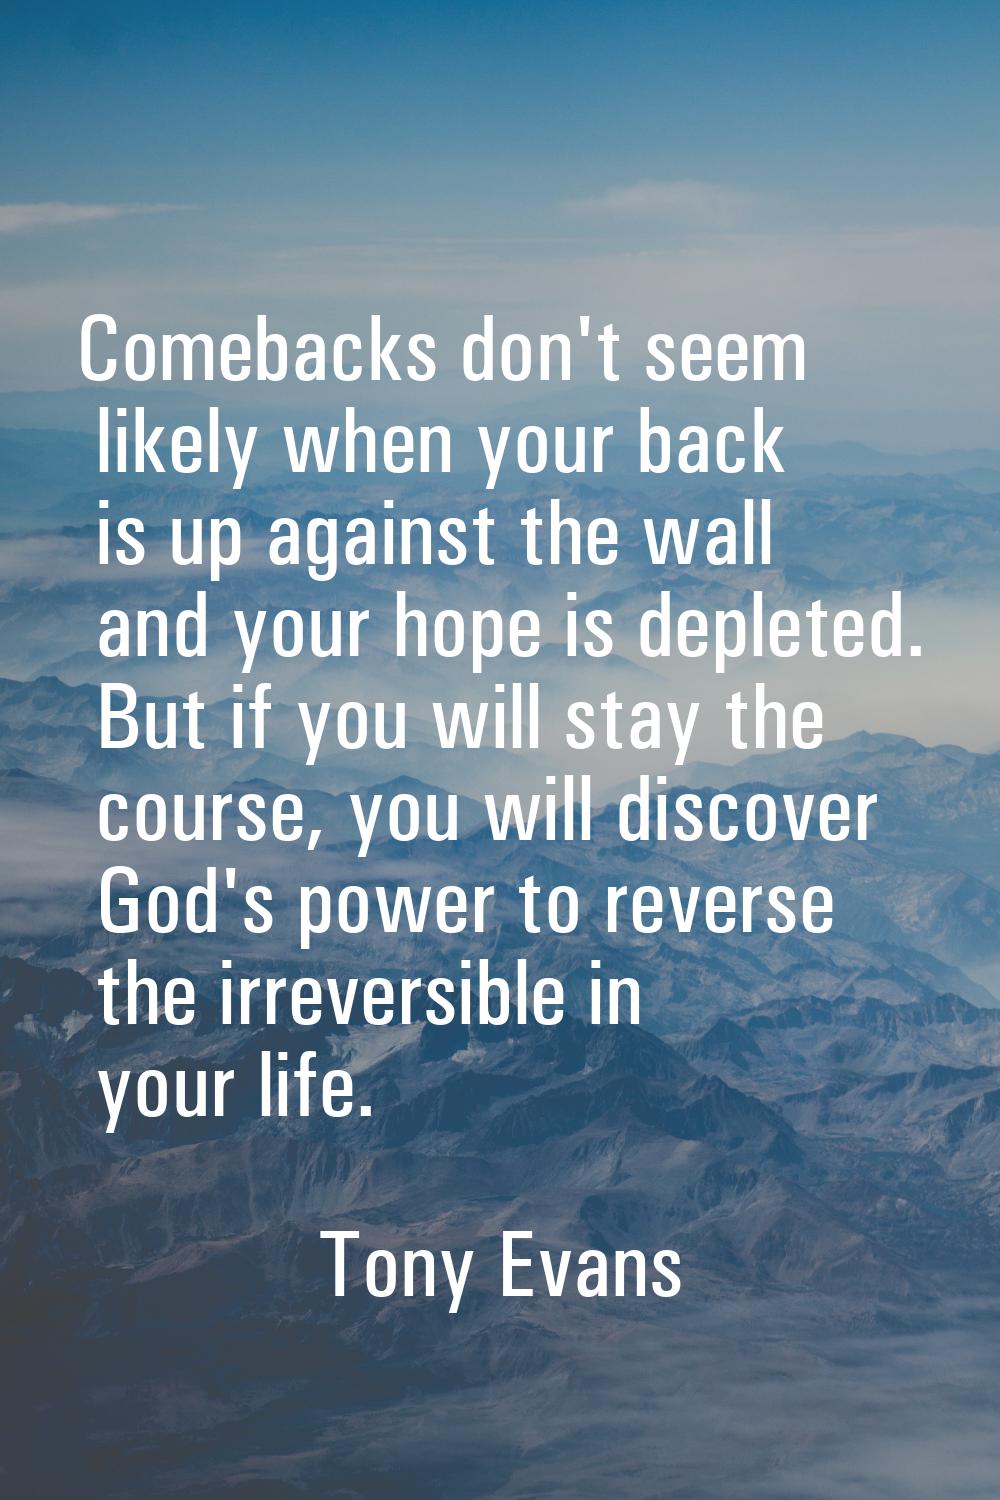 Comebacks don't seem likely when your back is up against the wall and your hope is depleted. But if